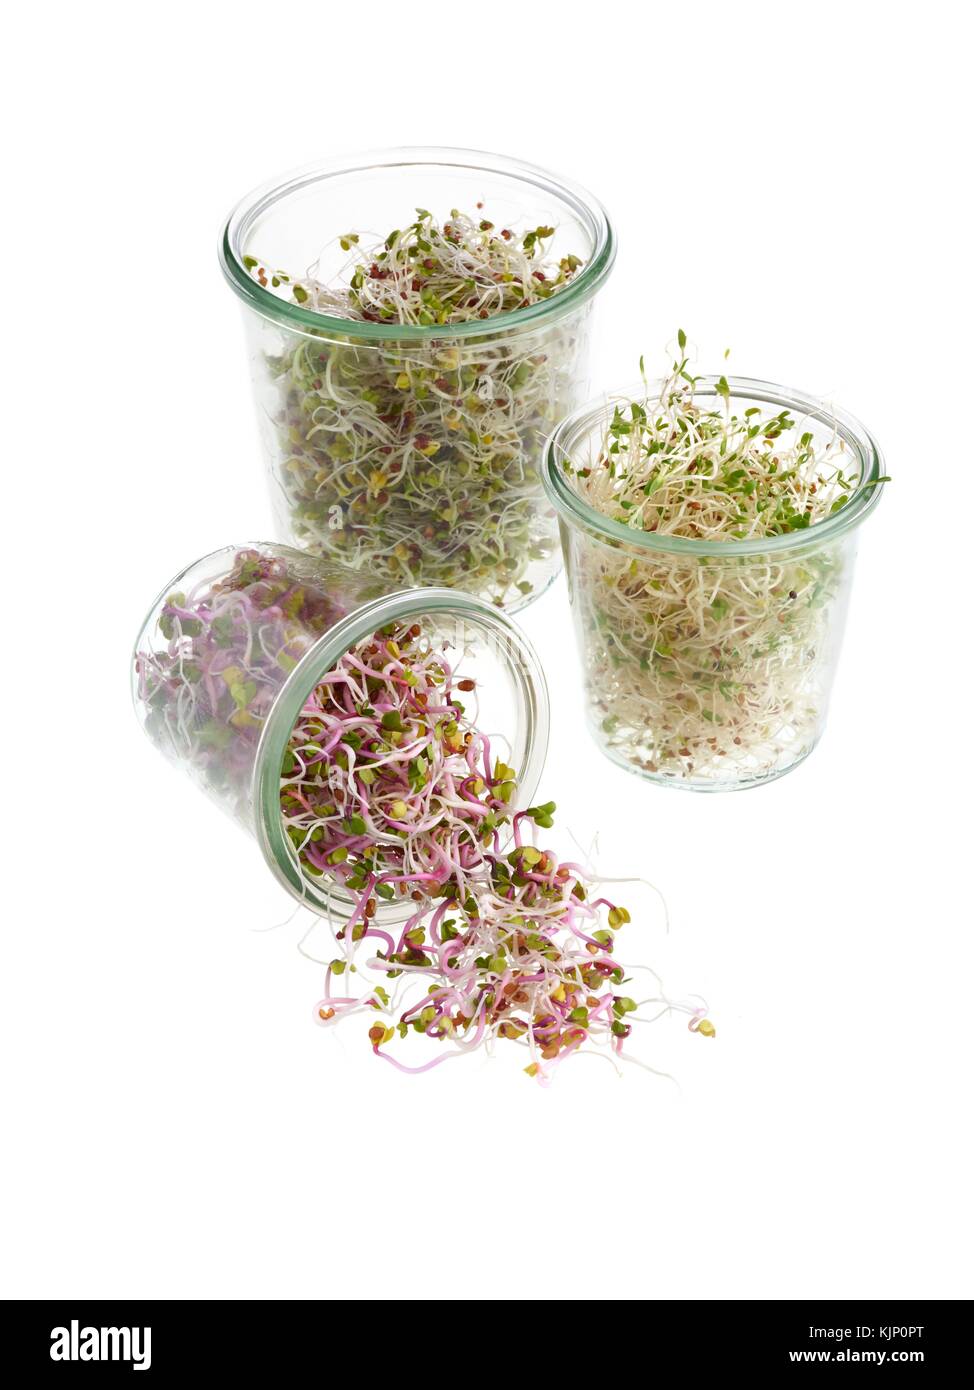 Sprouting beans in jars against a white background. Stock Photo